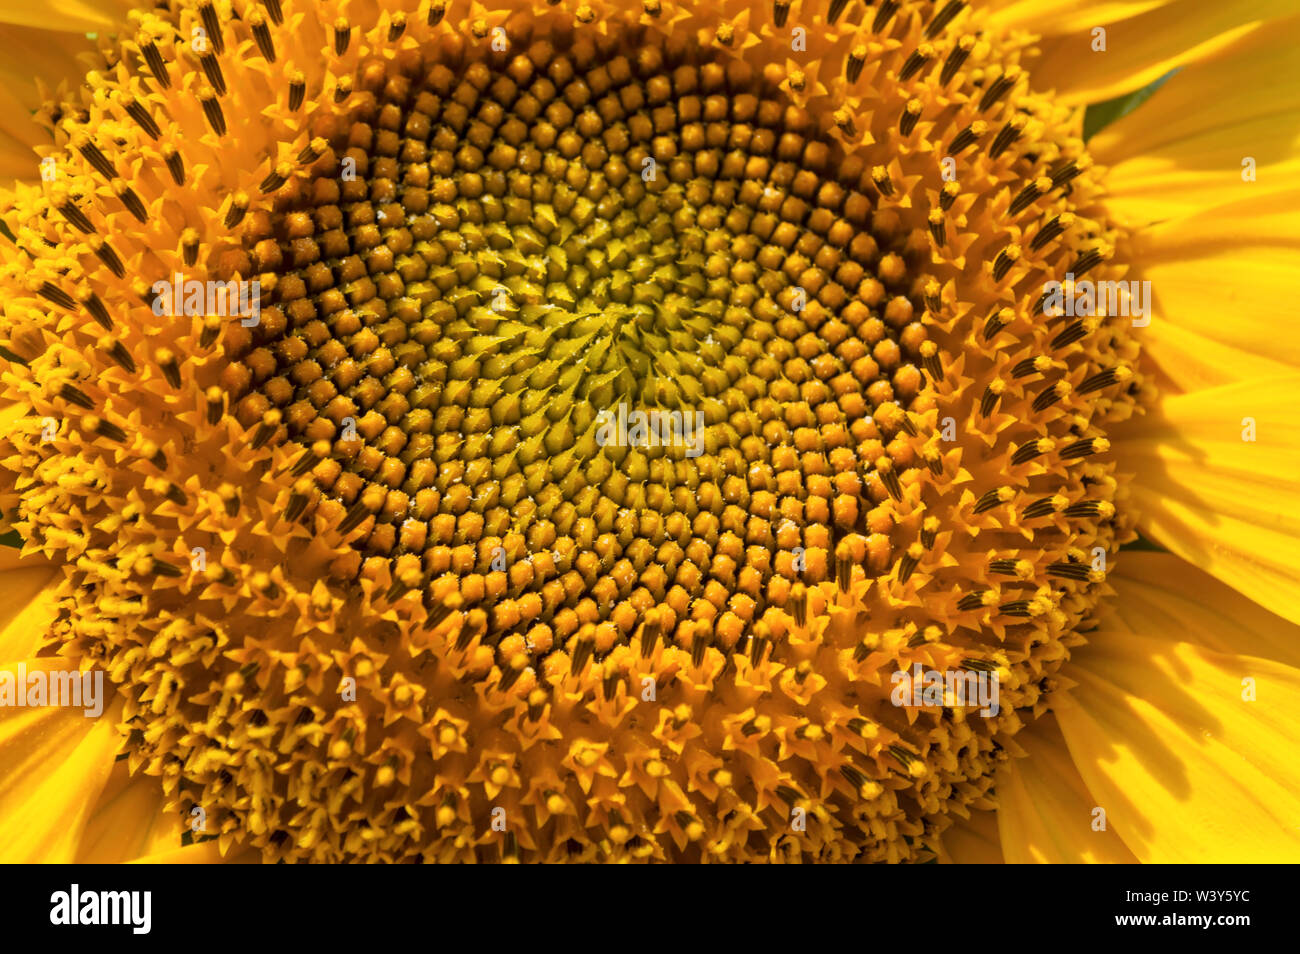 Macro view of sunflower in bloom. Middle part of sunflower close up. Soft focus. Stock Photo